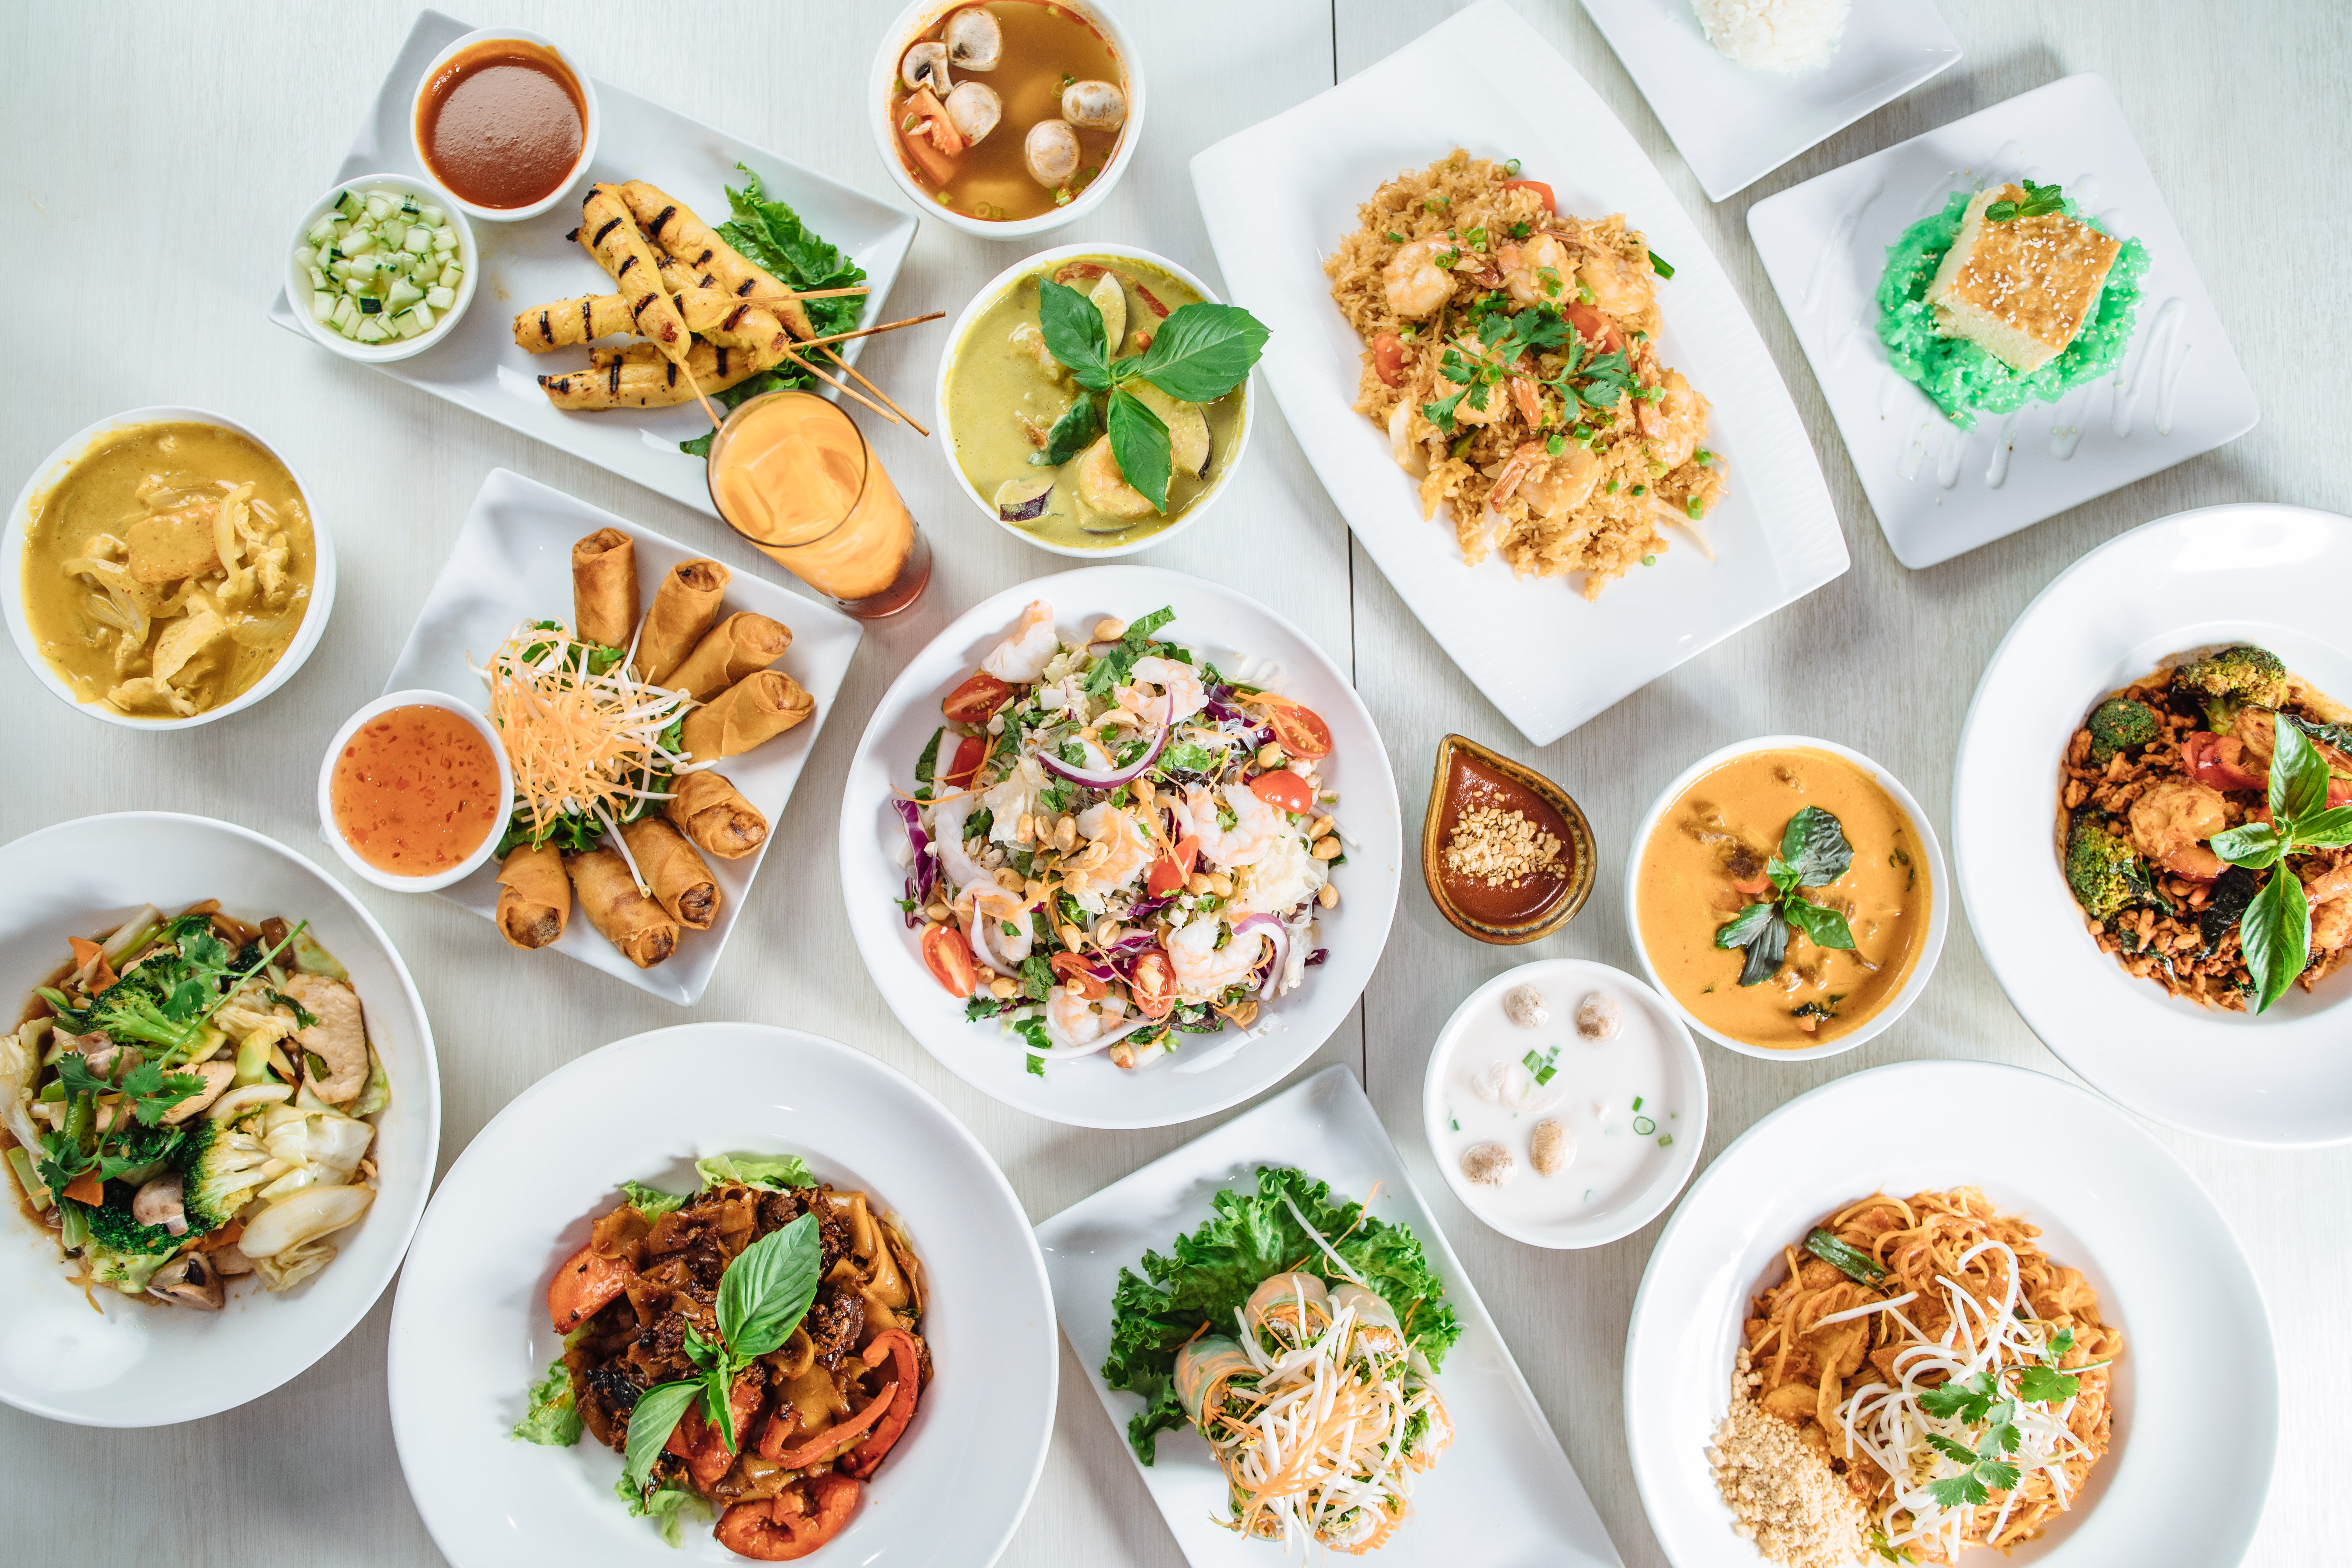 A spread of Thai noodle dishes and curries